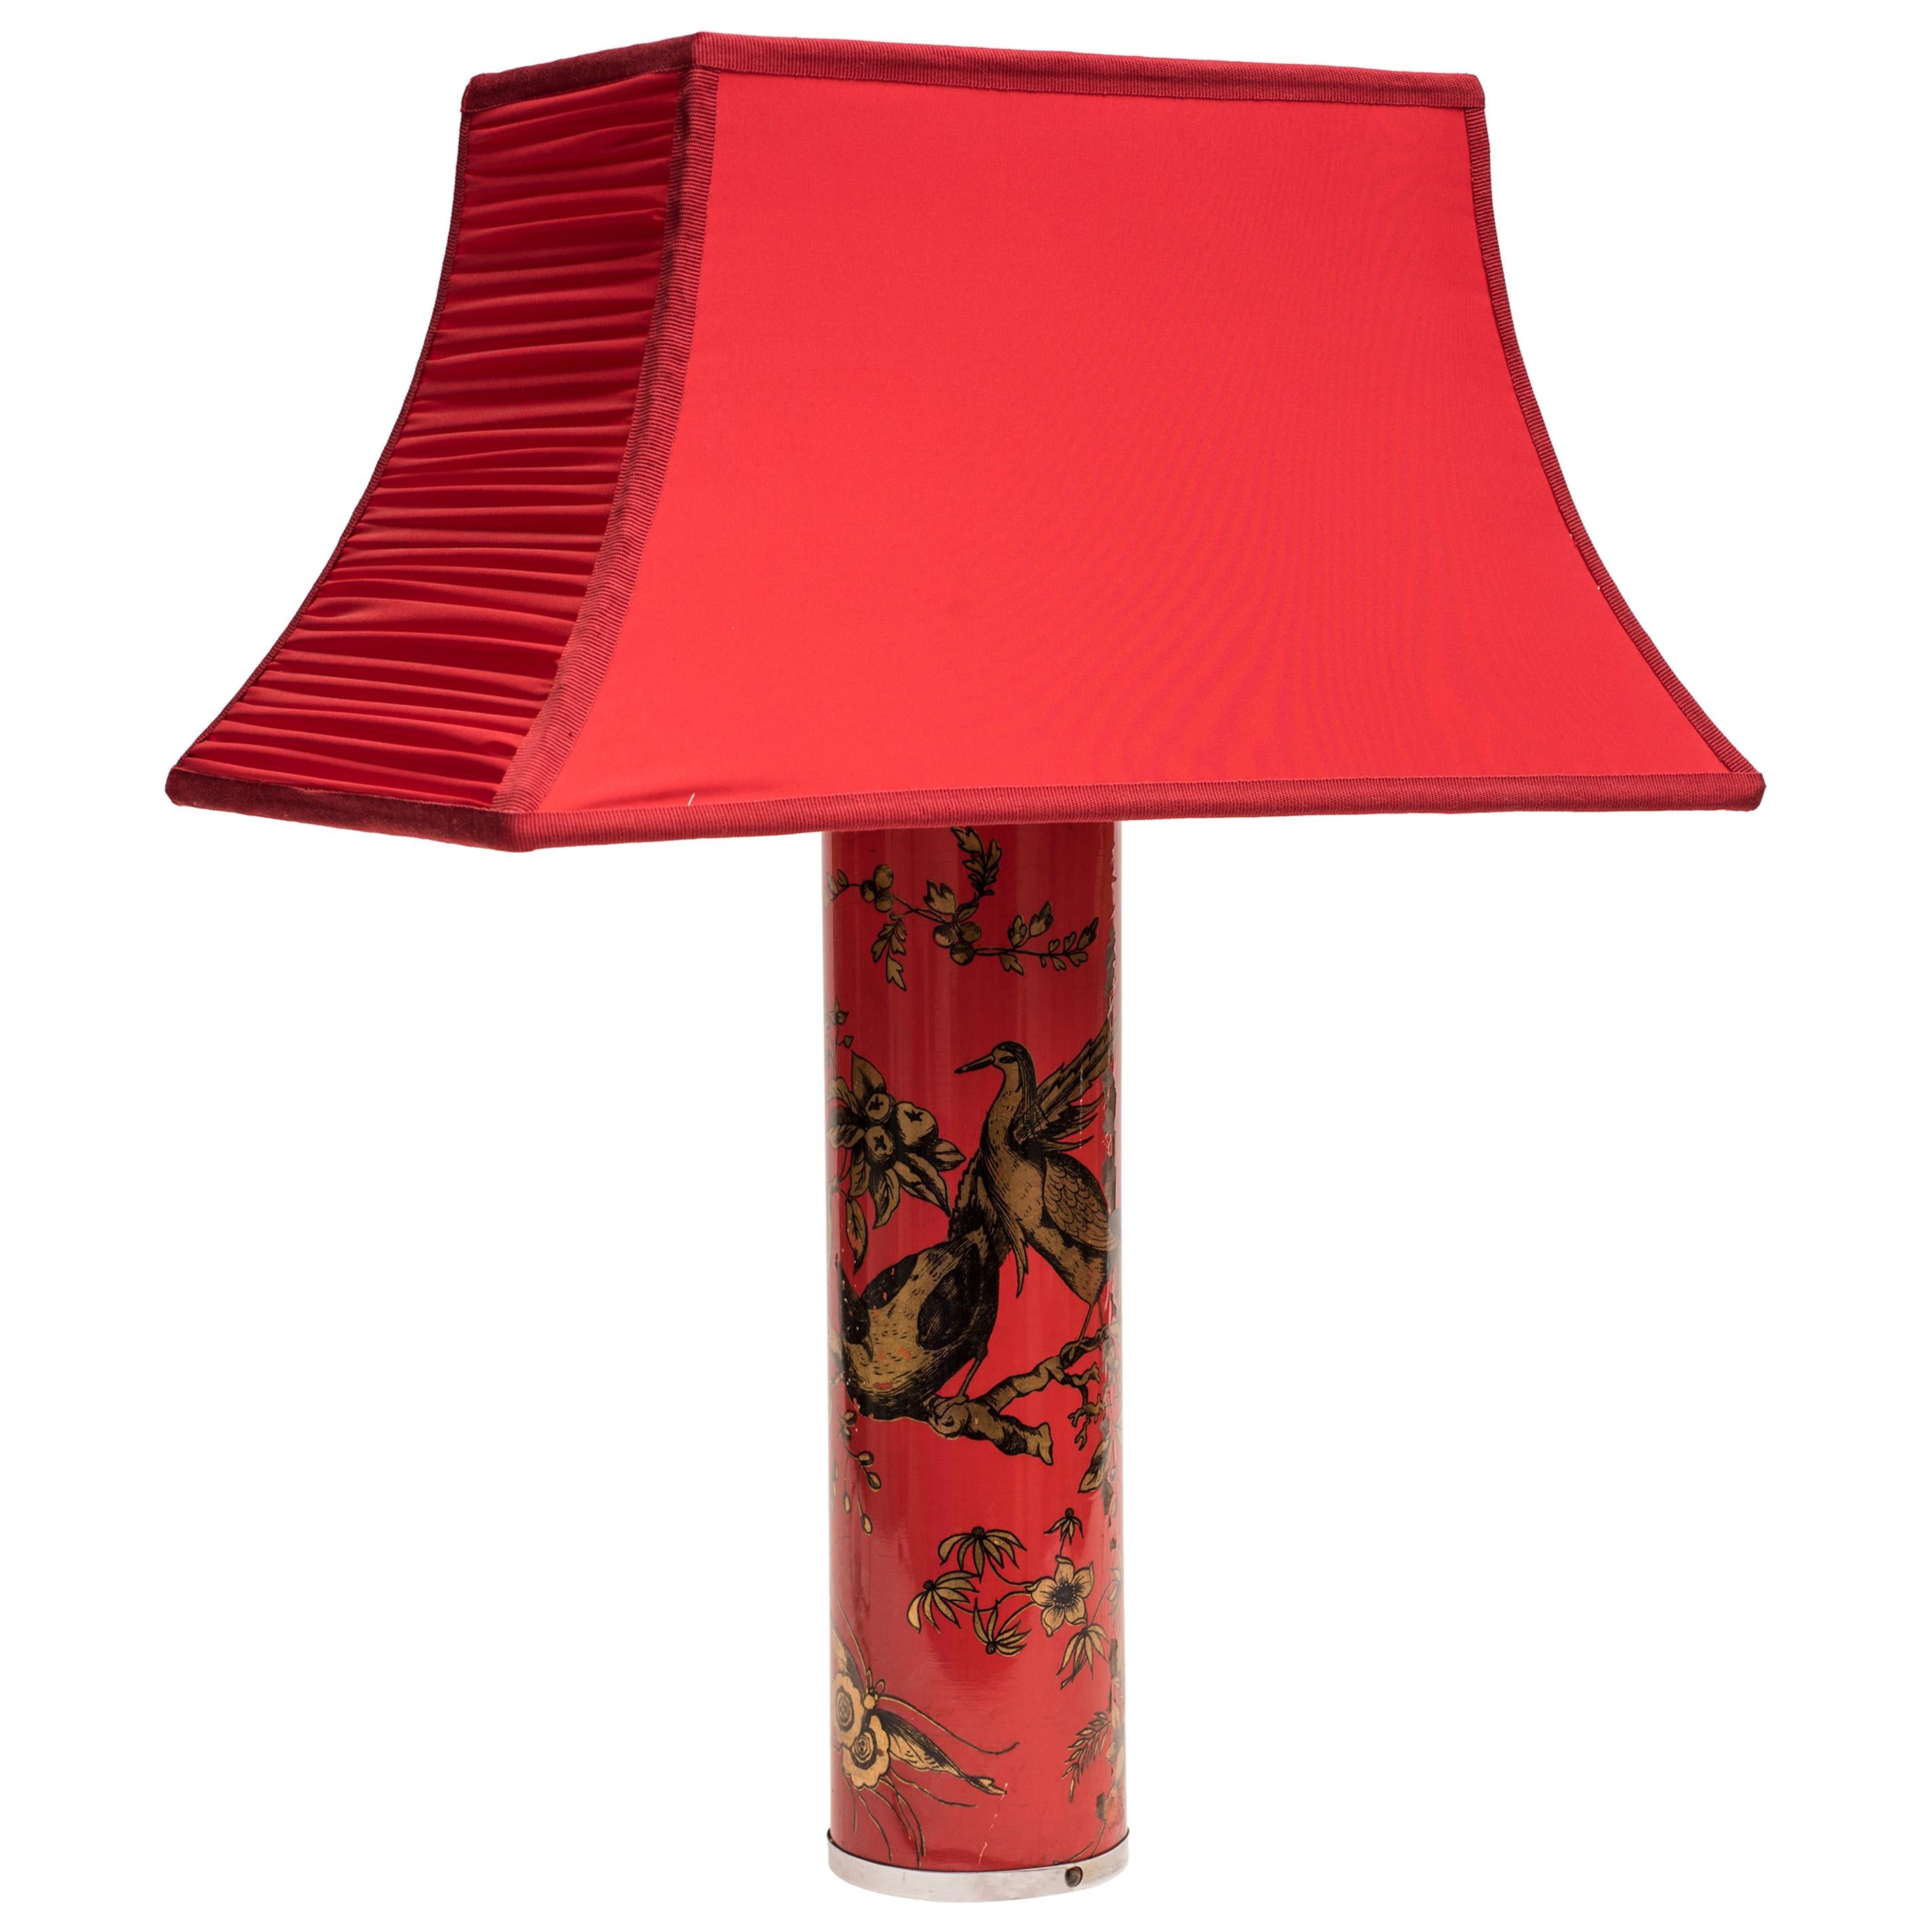 Original Vintage Red Lamp by Piero Fornasetti, 1960s